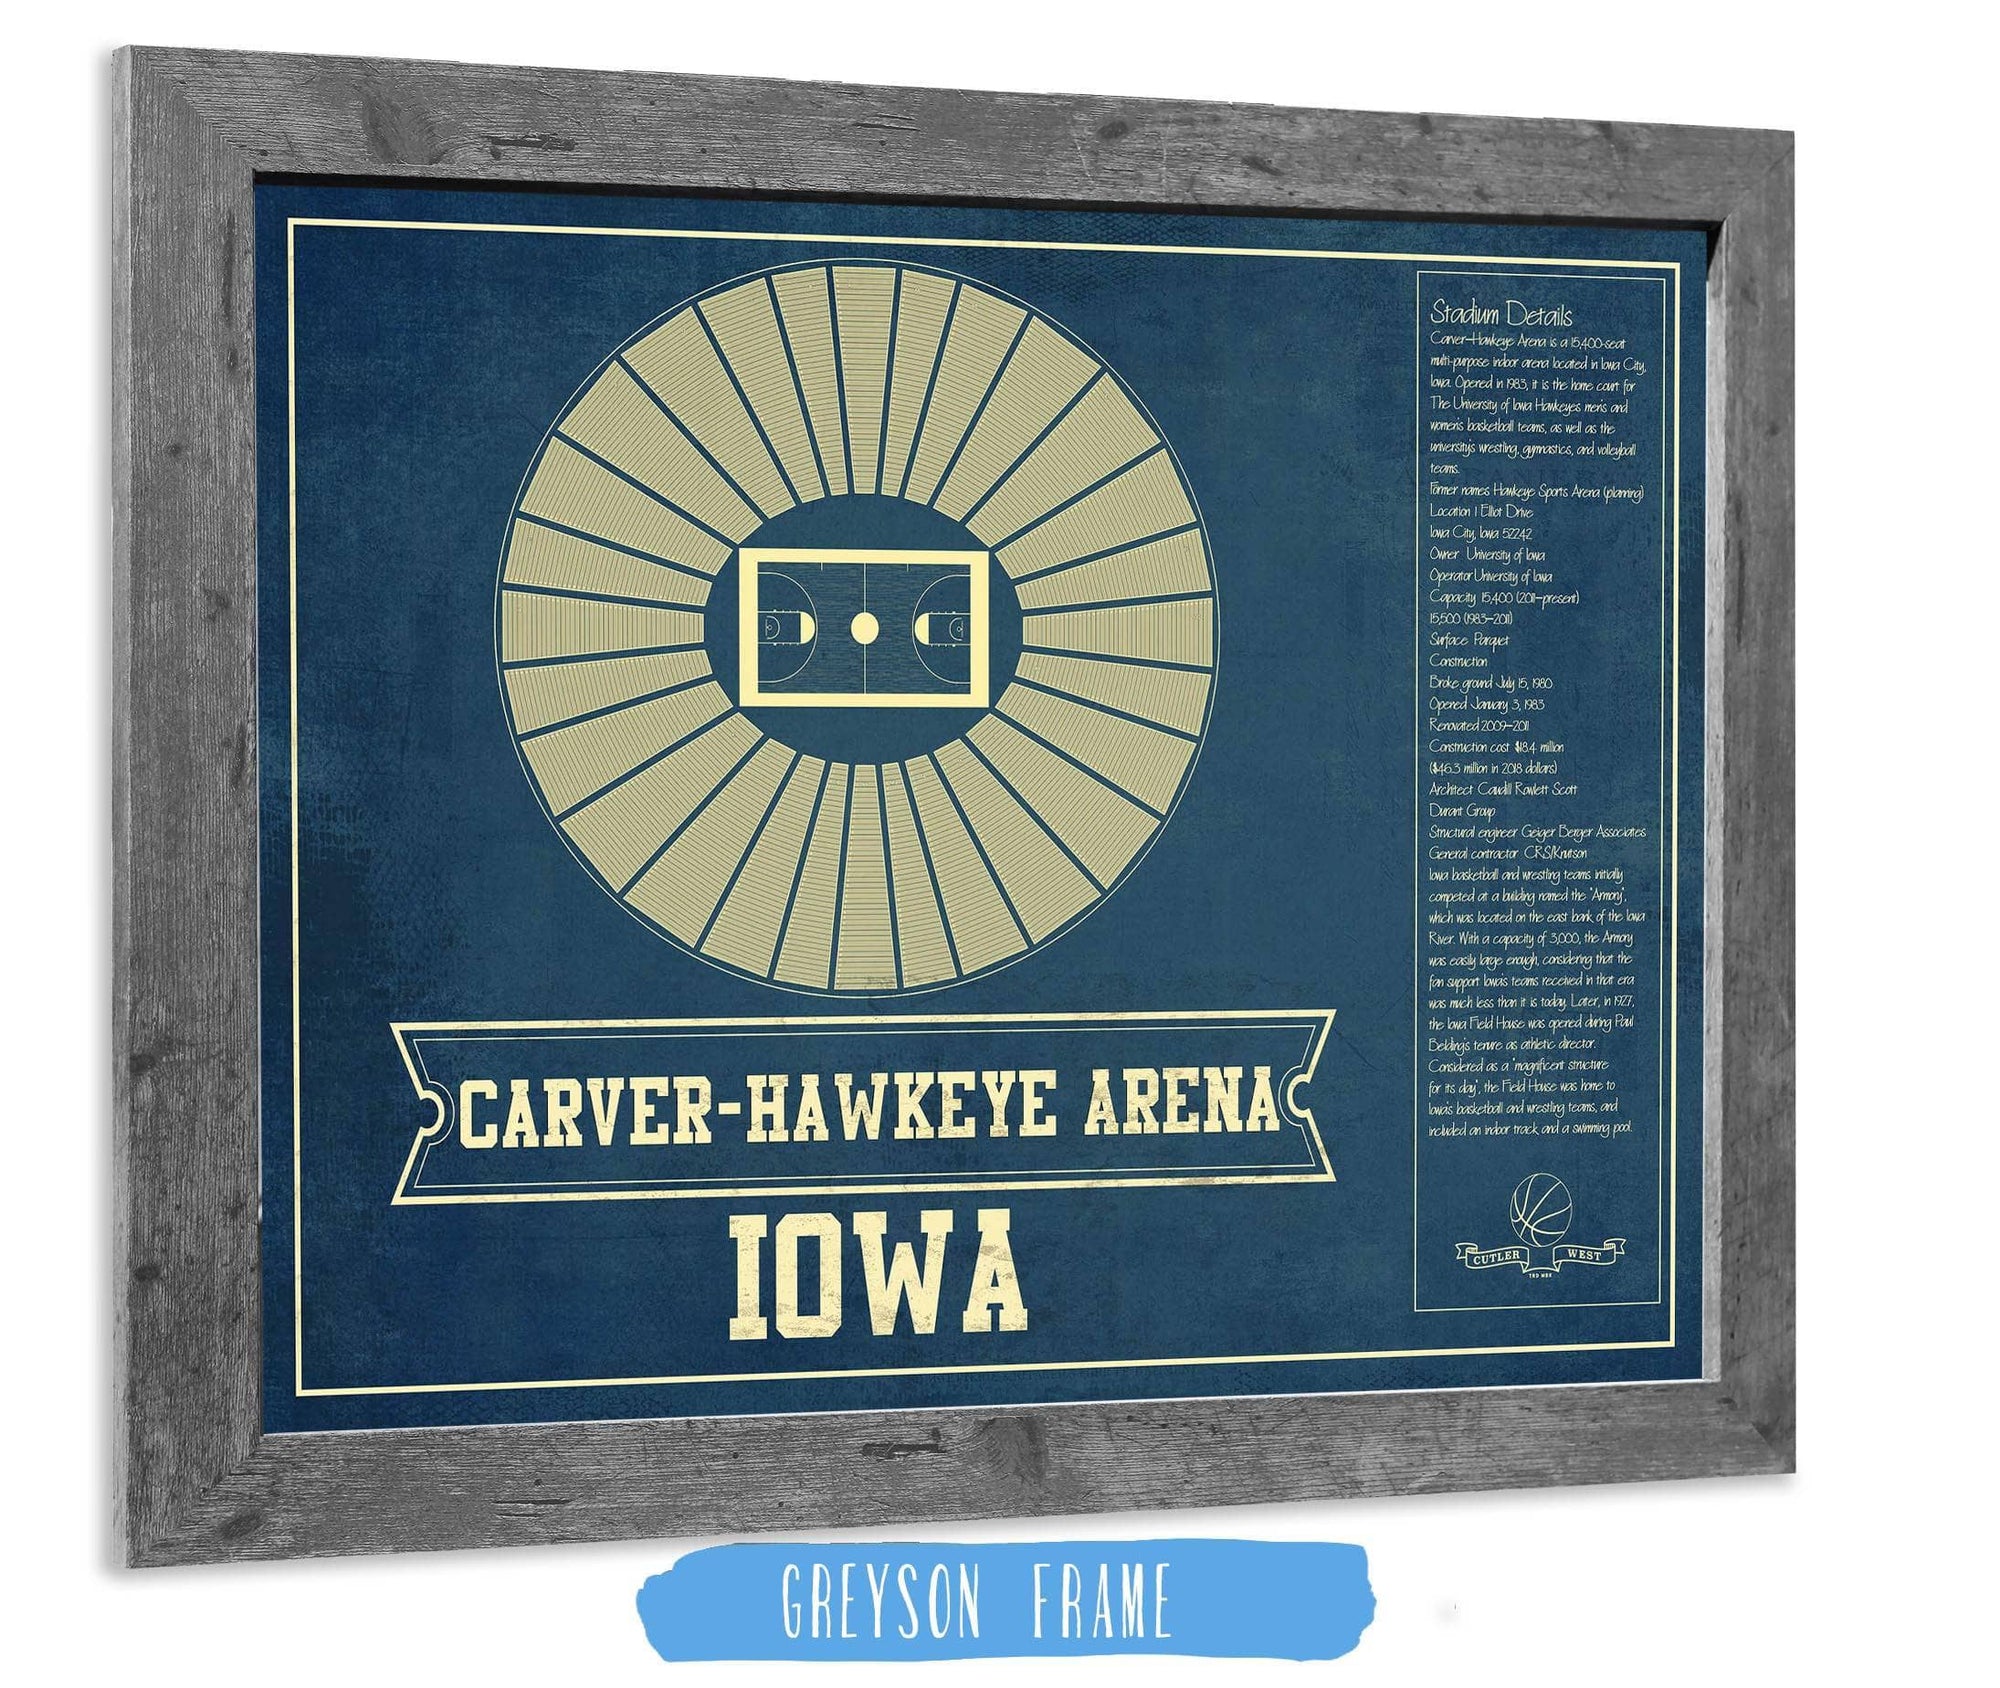 Cutler West Basketball Collection 14" x 11" / Greyson Frame Carver–Hawkeye Arena Iowa Men's And Women's Basketball Vintage Print 933350233_83433